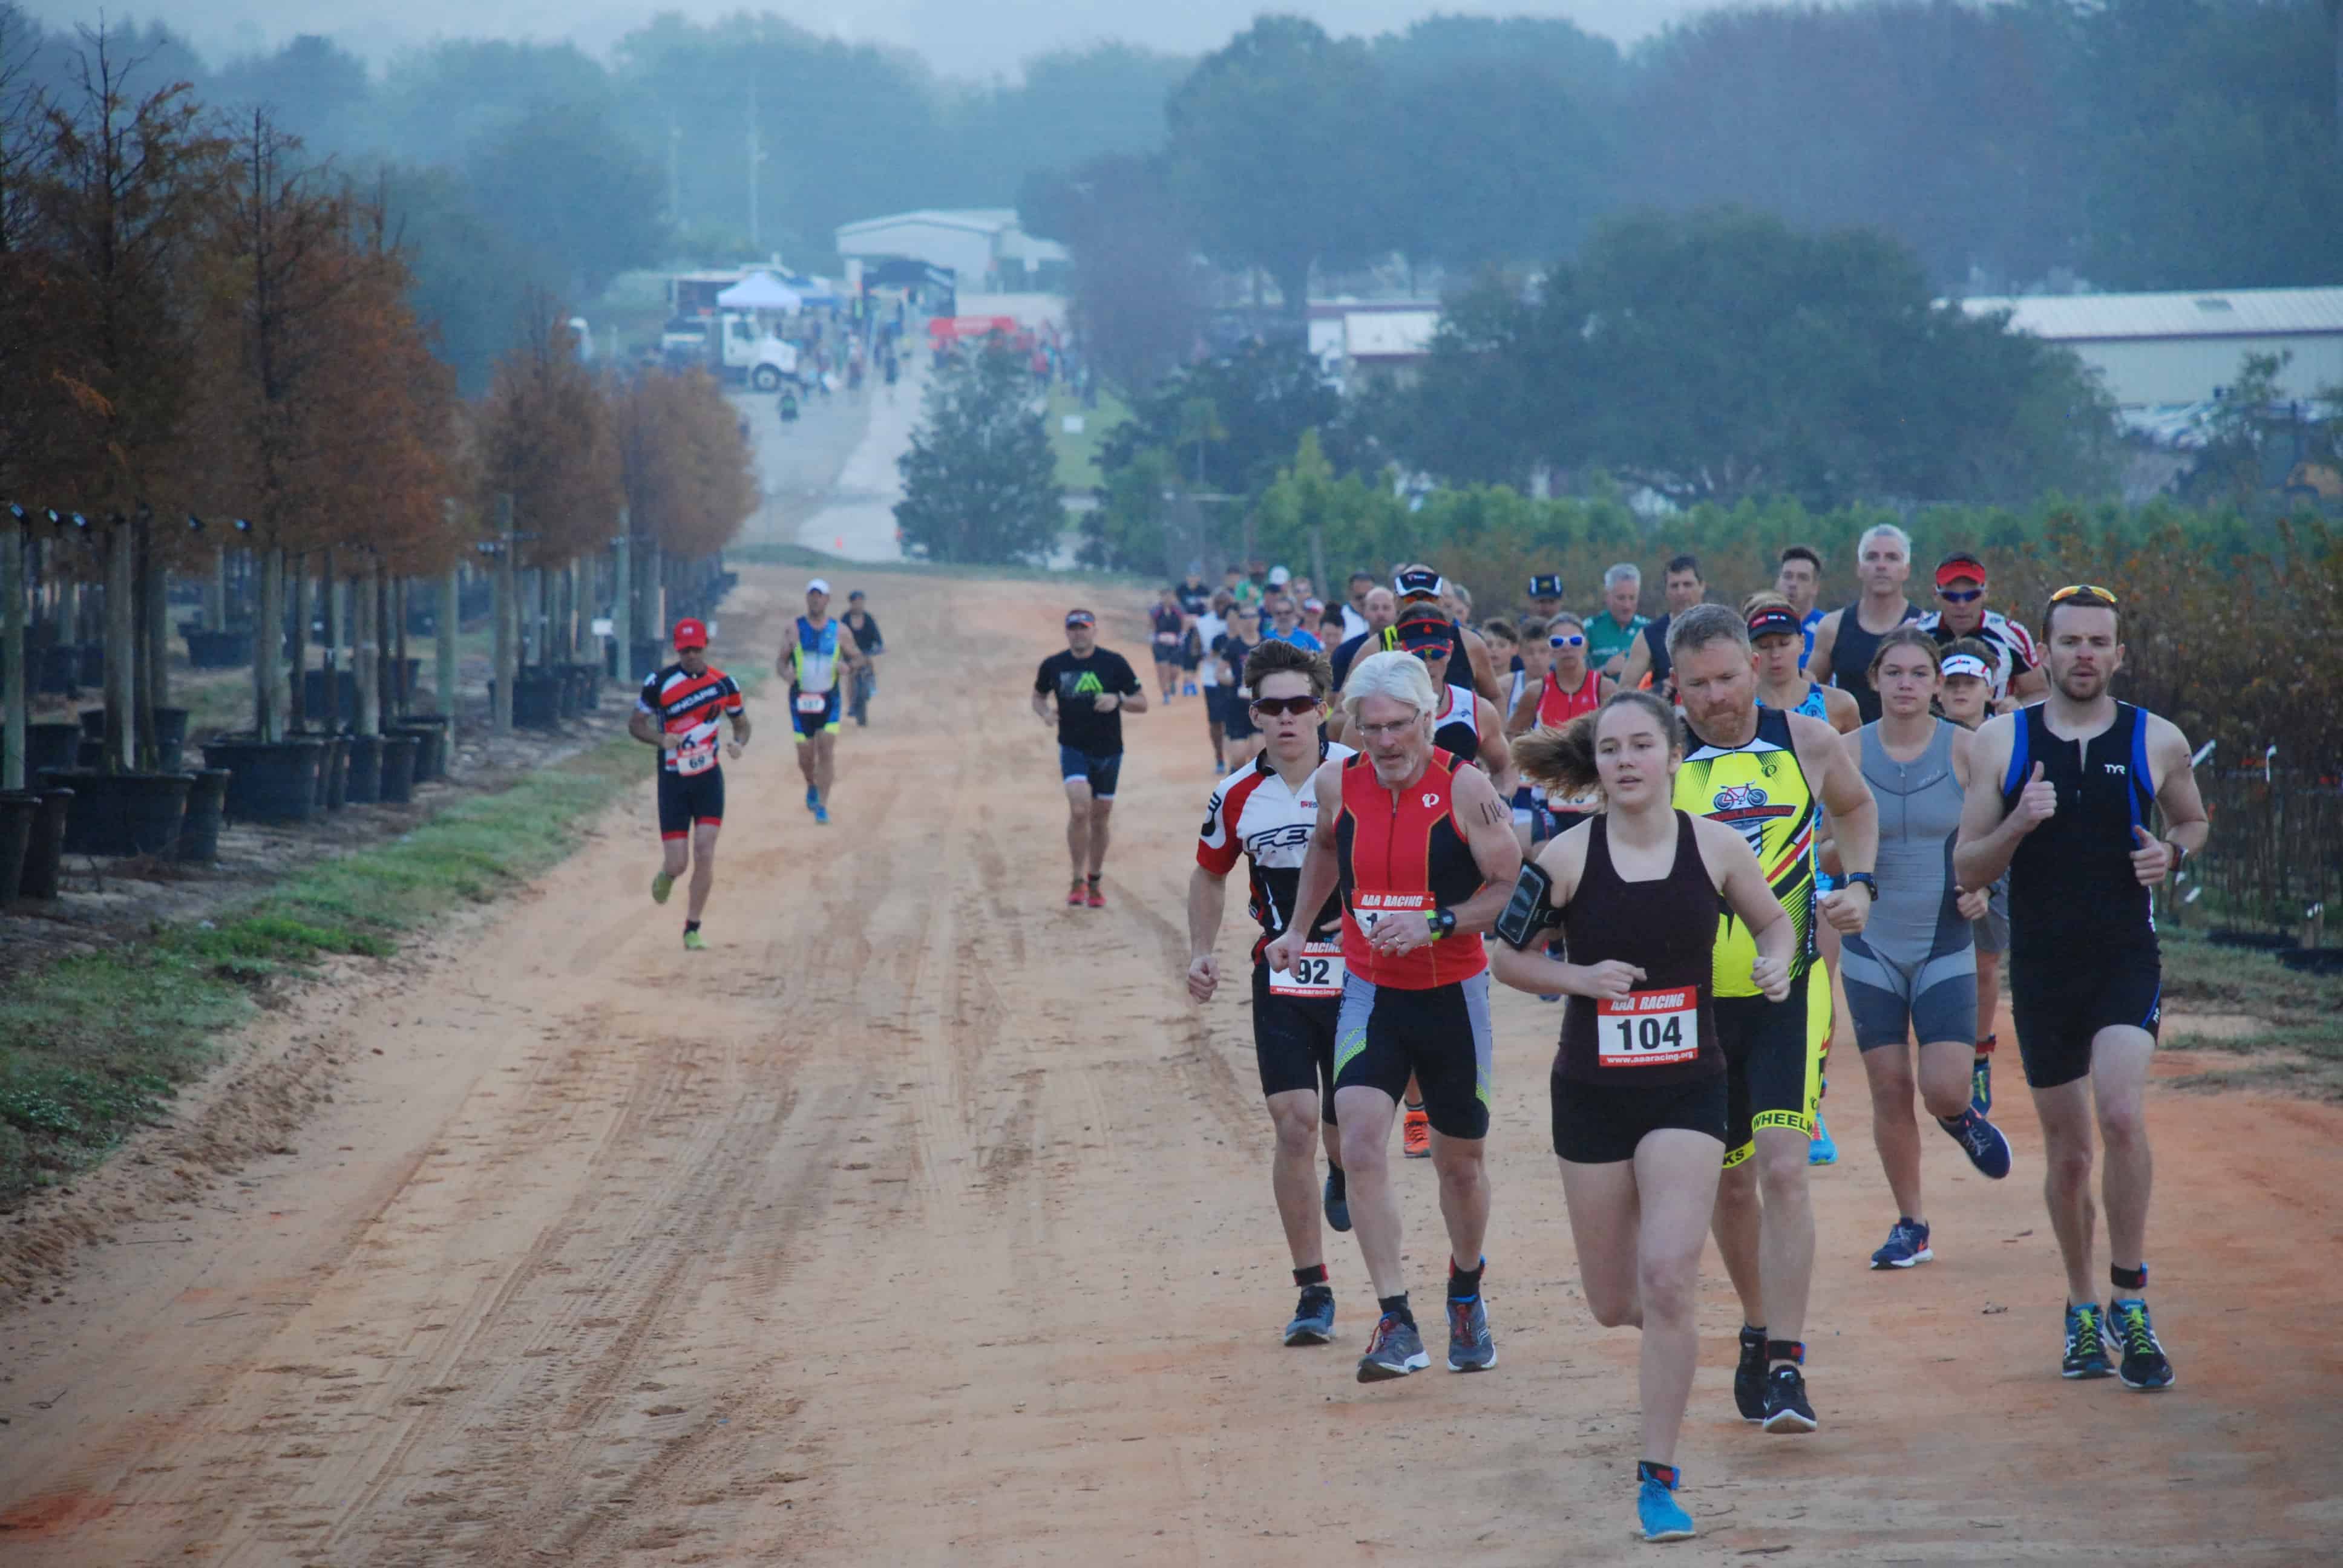 Runners run on a clay trail beside rows of containerized bald cypress trees..